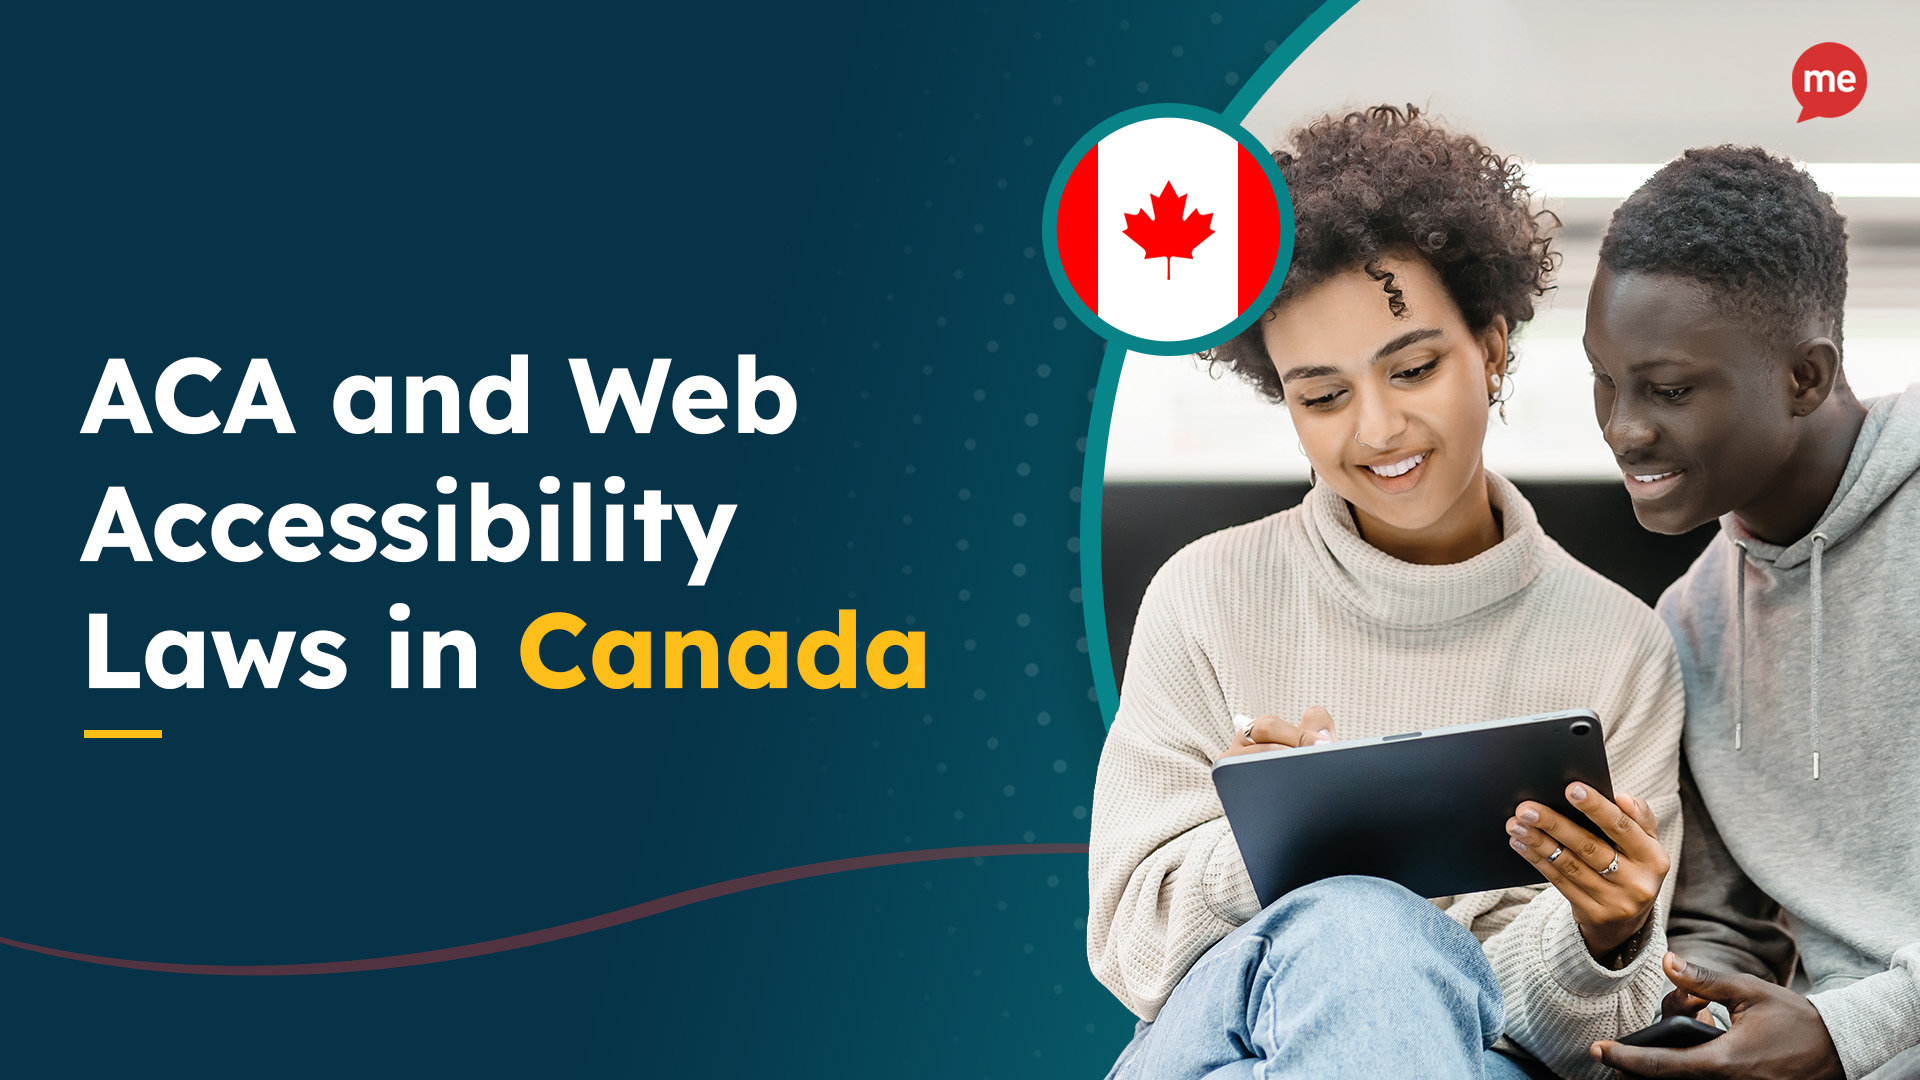 Two people looking at a tablet with the text "ACE and Web Accessibility Laws in Canada"